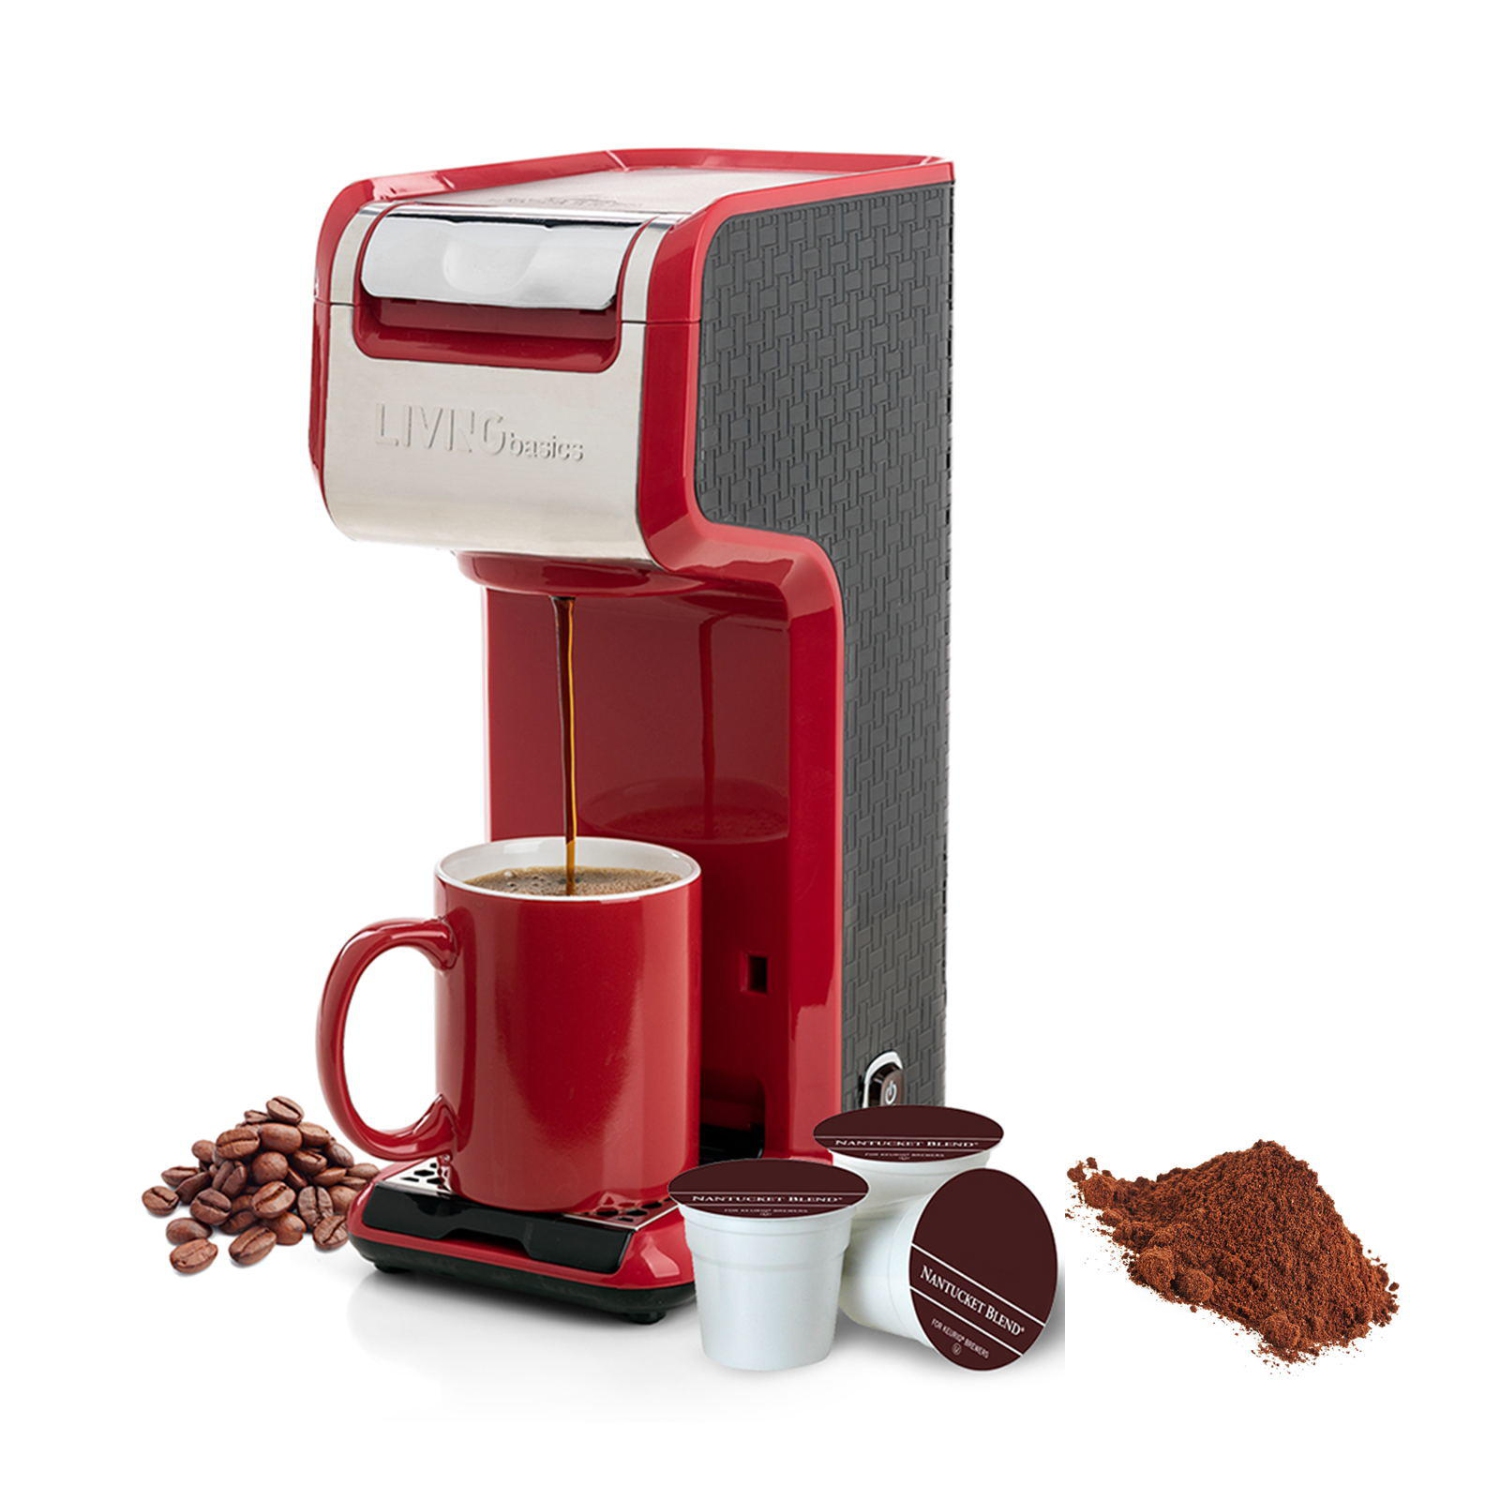 2-in-1 Coffee Maker Brewer for Single-Serve K-Cup Pods Carafe Pods, Capsules or Ground Coffee - Red